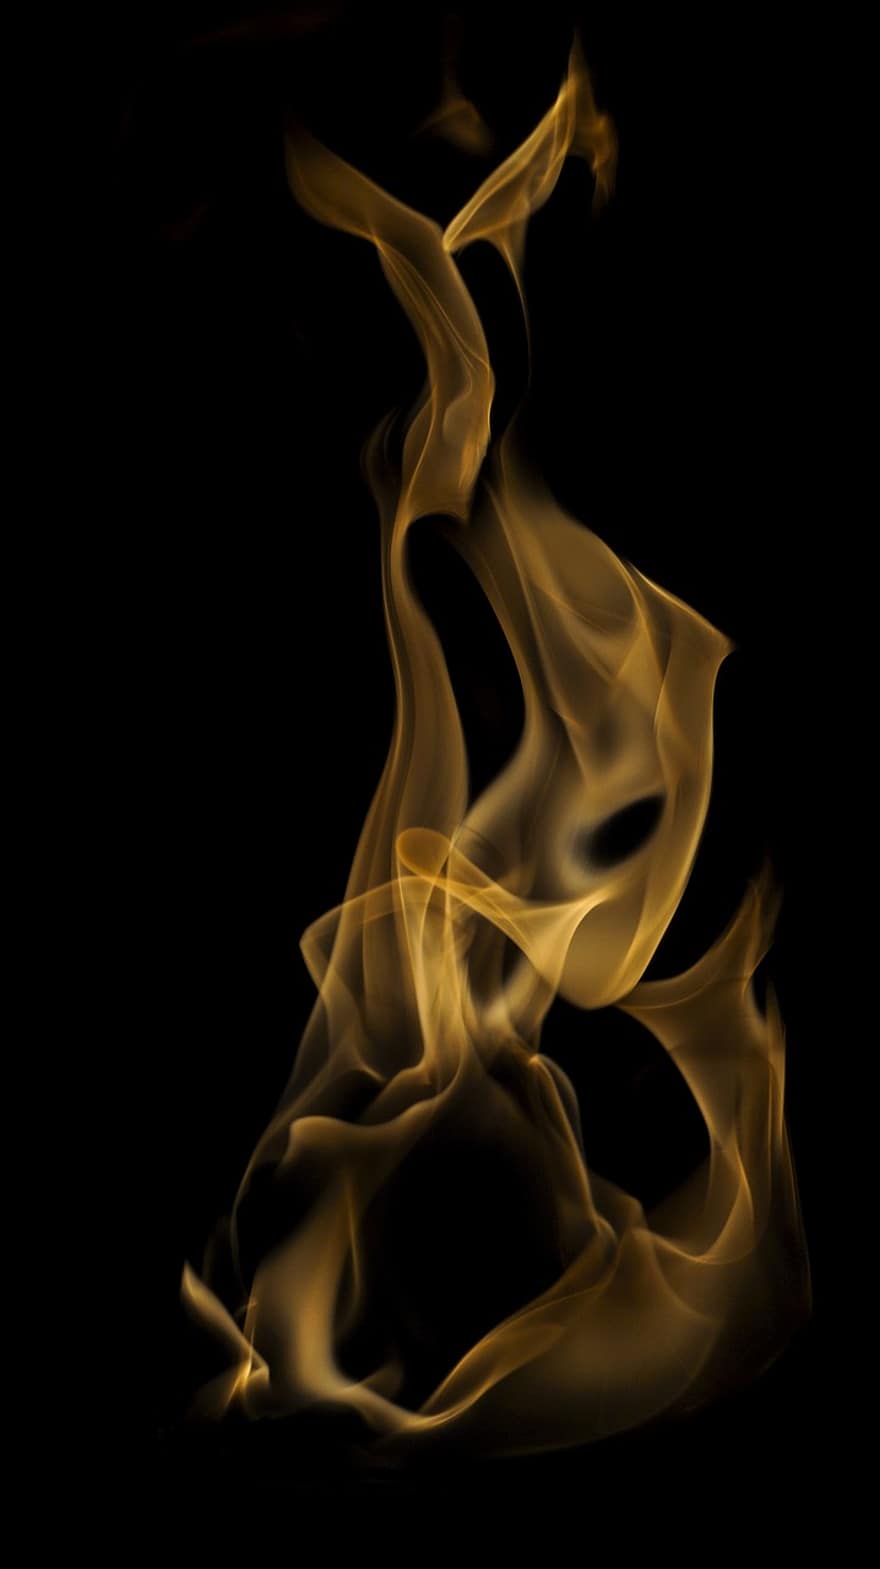 Fire, Color, Background, Flame, Light, Burn, Photoshop, Texture, Effects, Colorful, Fire Effect